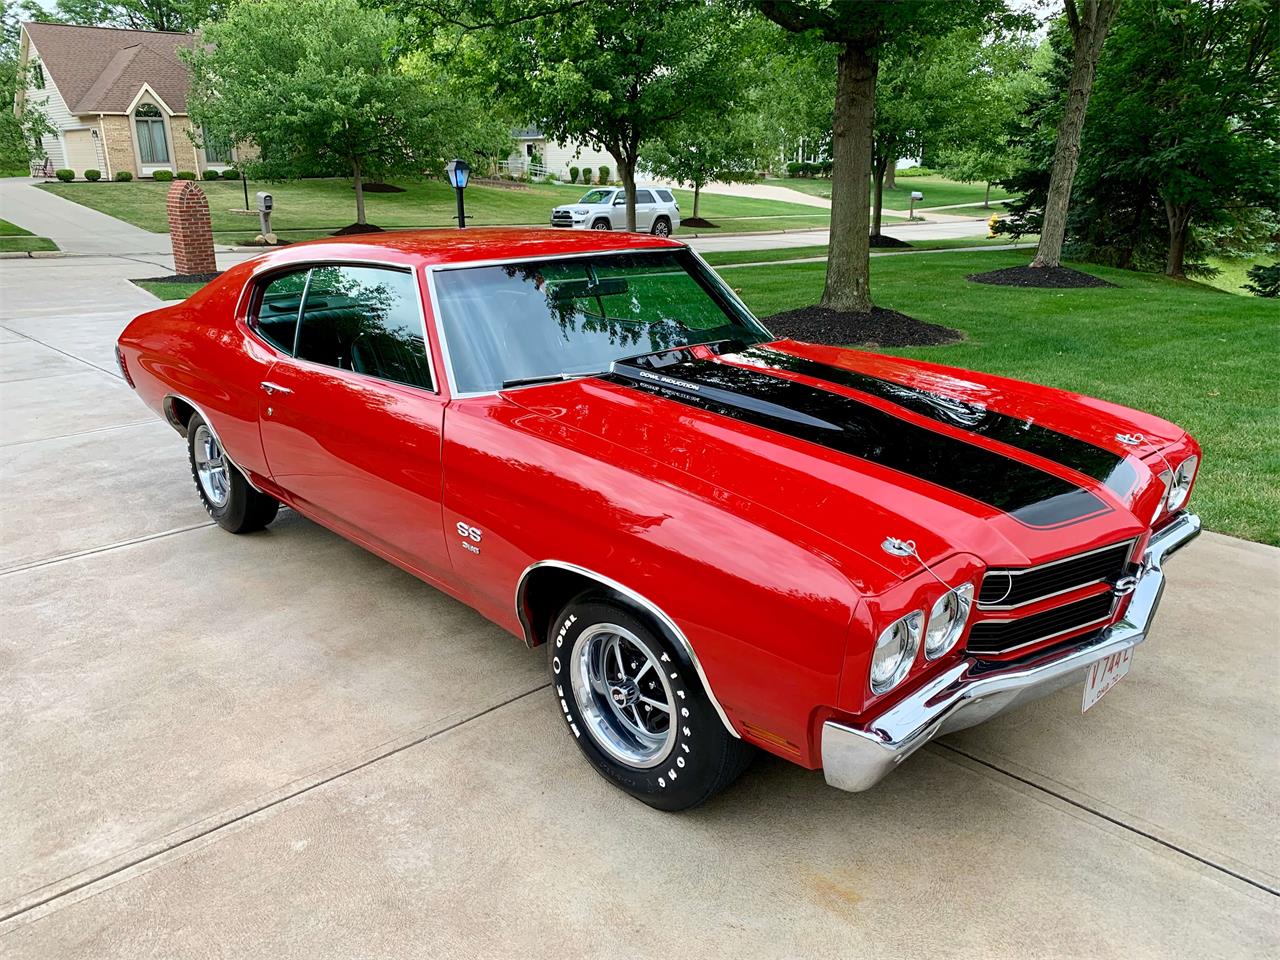 1970 Chevelle Ss For Sale Under 10 000 - www.inf-inet.com